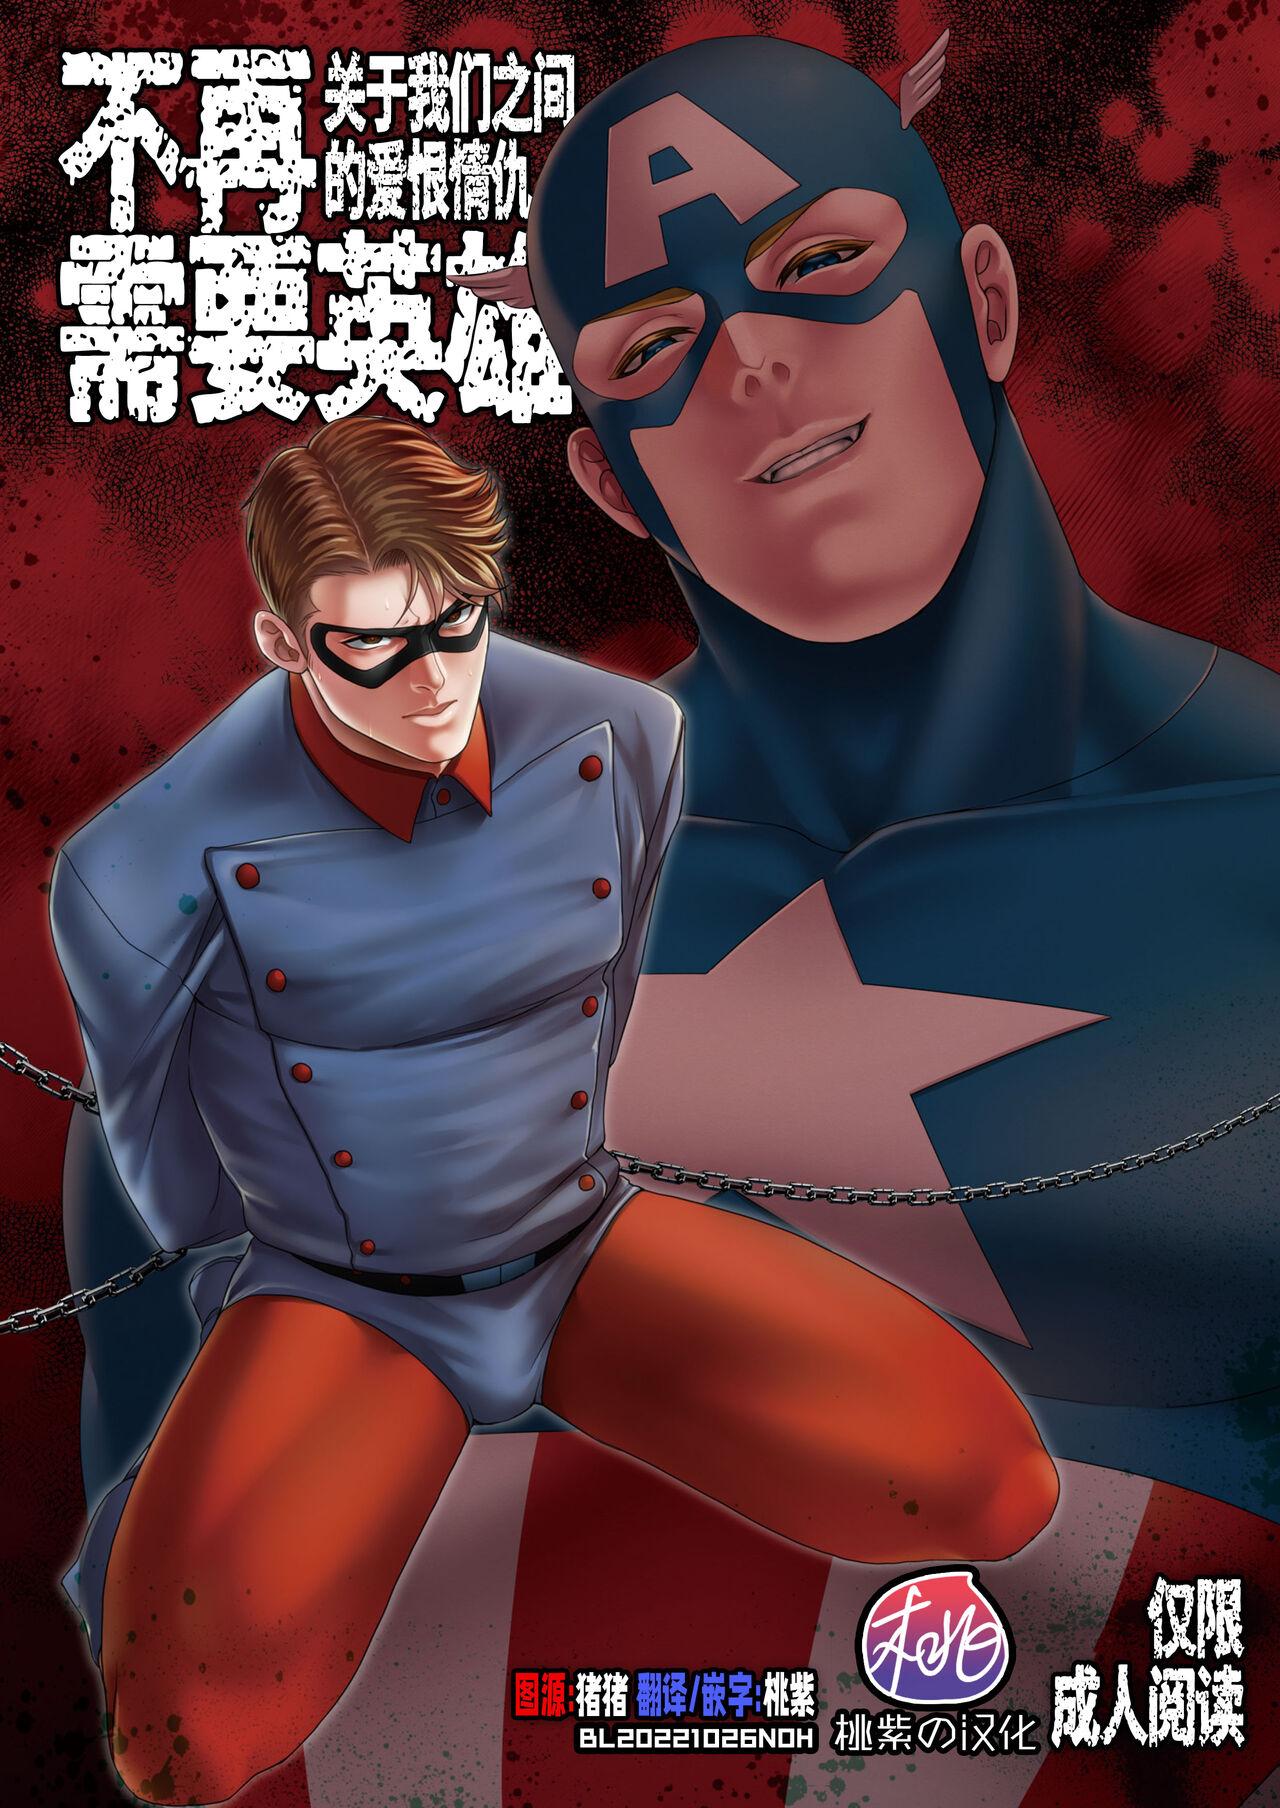 American NO HEROES Our love and hate relationship | 不再需要英雄 - 关于我们之间的爱恨情仇 - Avengers Fake Tits - Page 1